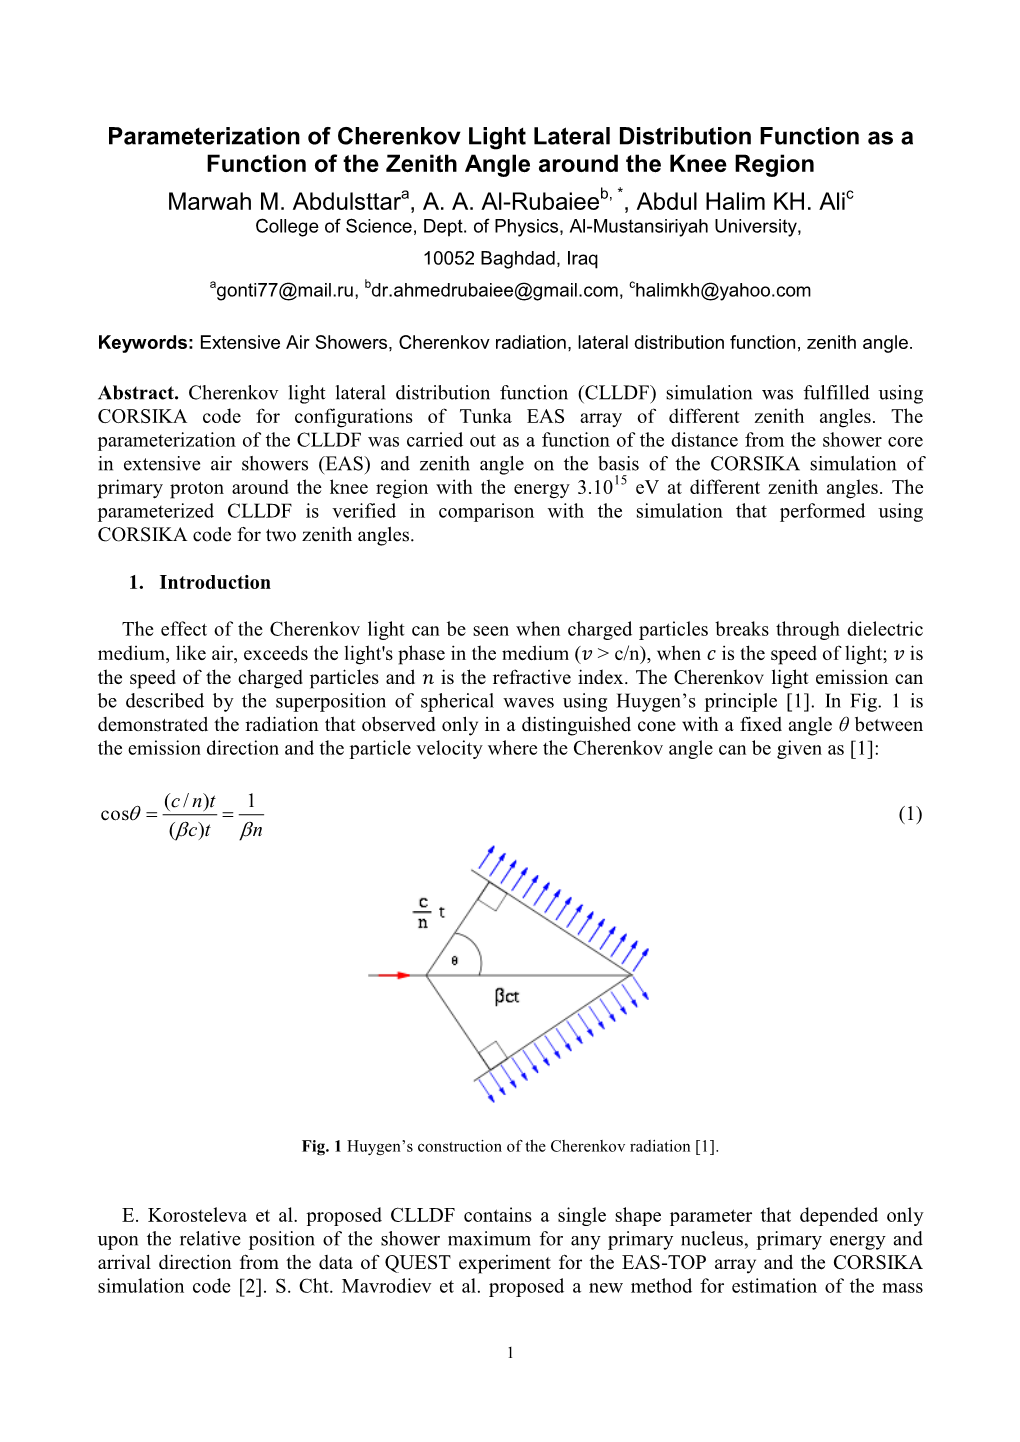 Parameterization of Cherenkov Light Lateral Distribution Function As a Function of the Zenith Angle Around the Knee Region Marwah M